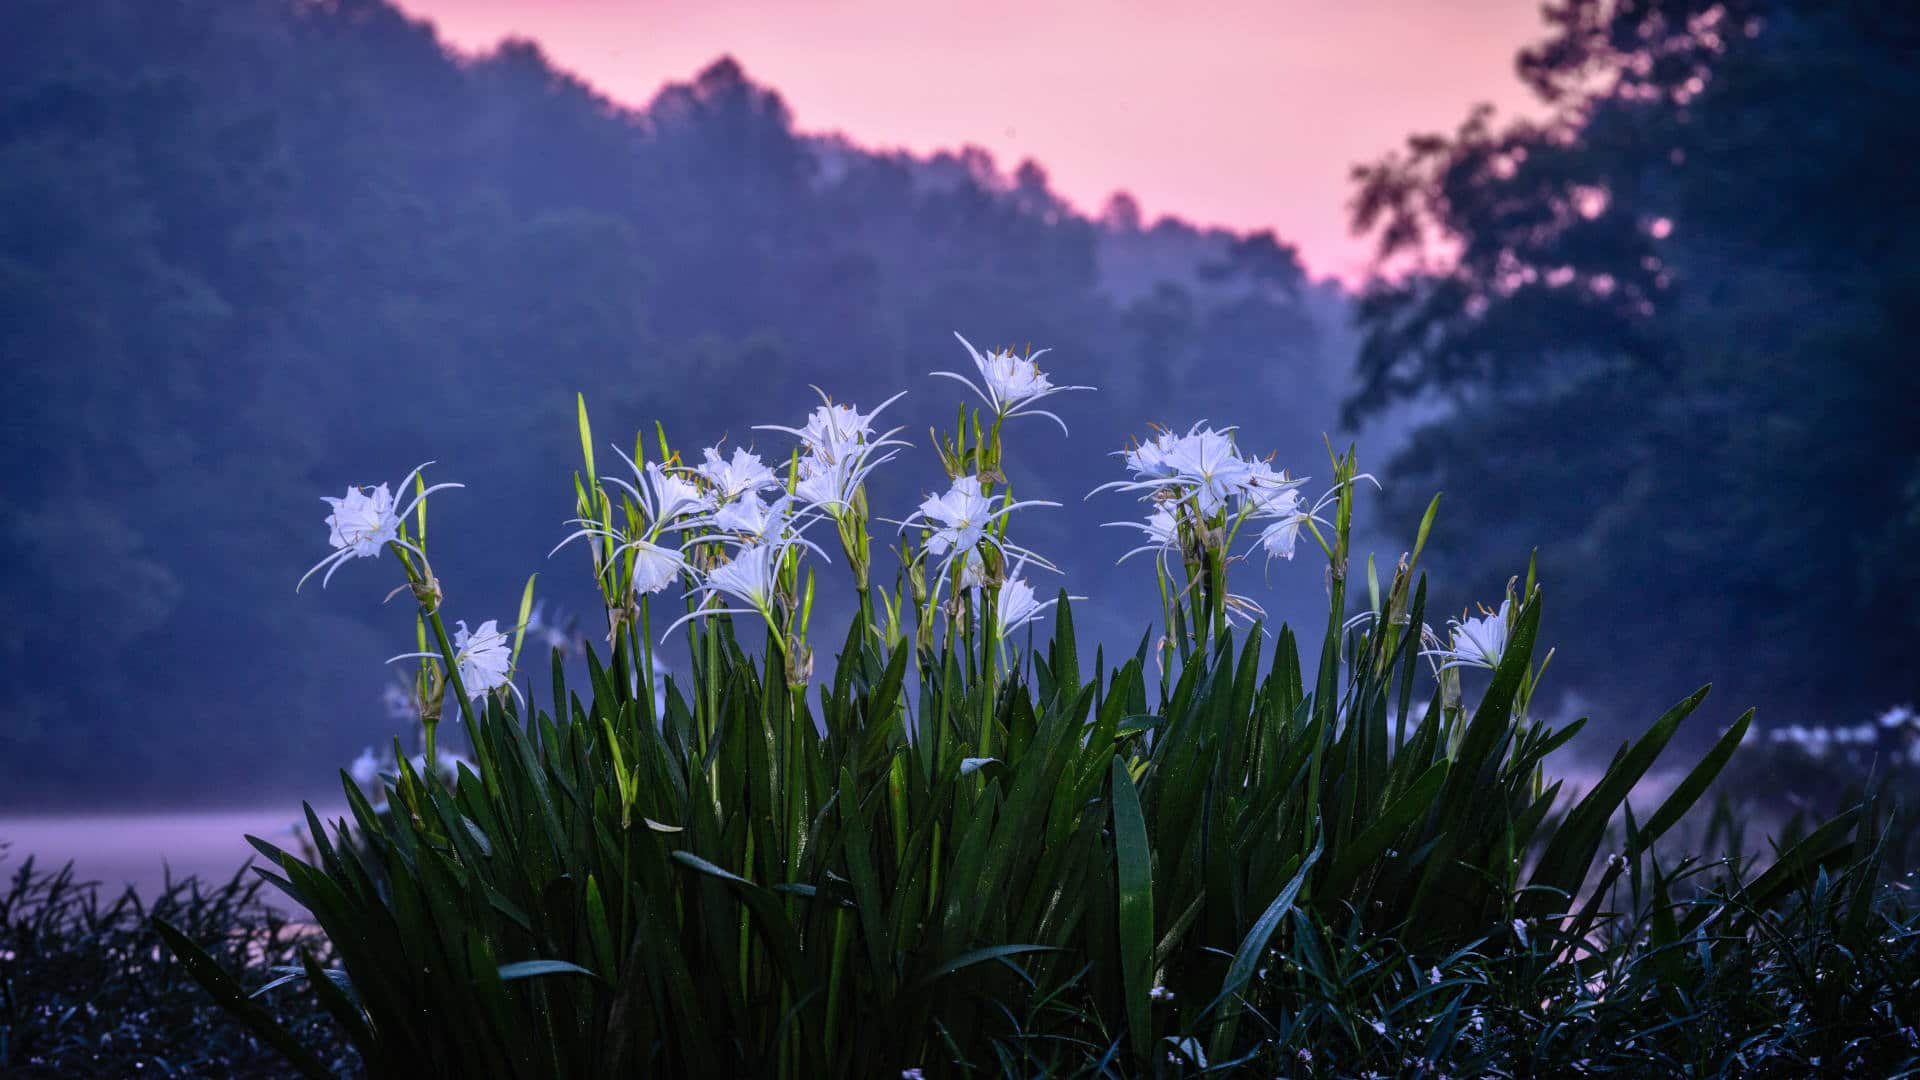 Cahaba Lilies flourish on the shores of the Cahaba River, which is a part of the Mobile River Basin. This branching network of rivers and creeks drains most of Alabama into Mobile Bay.